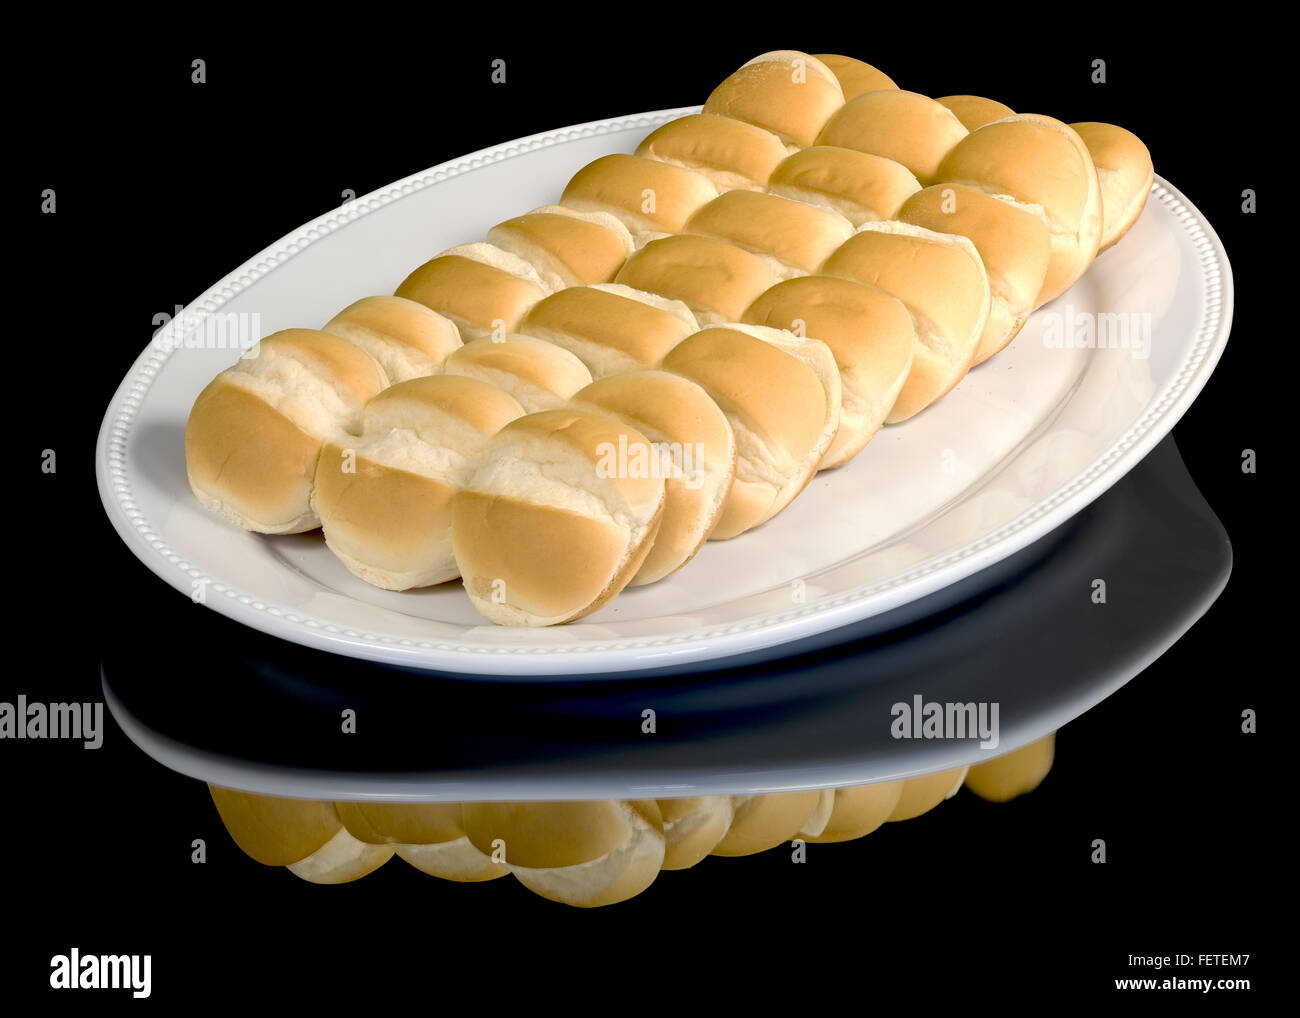 Platter filled with fresh baked buns Stock Photo